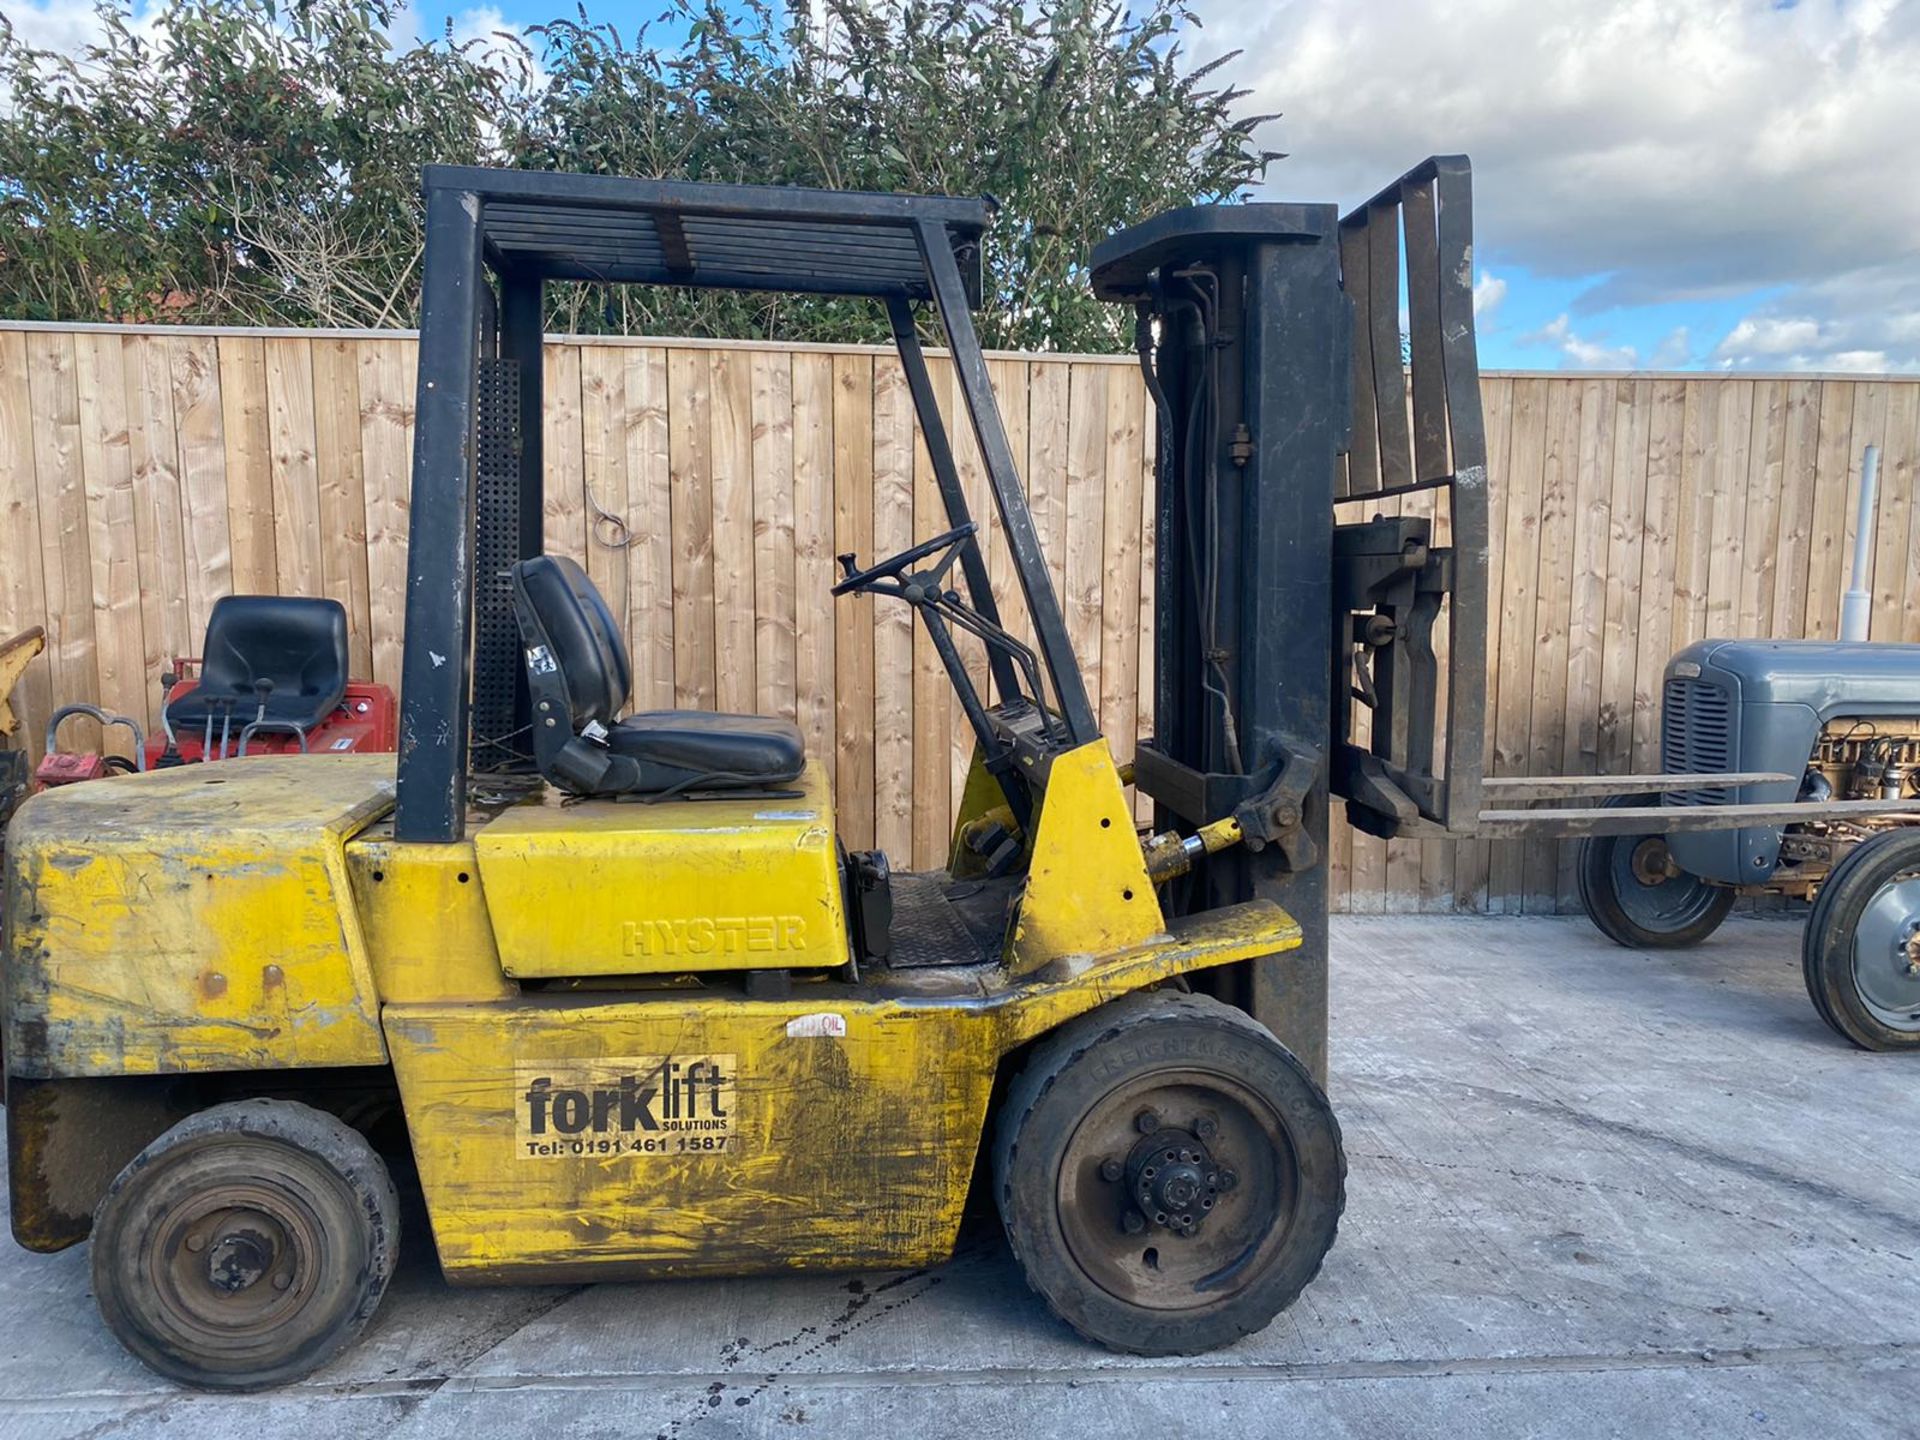 UNRESERVED HYSTER 3 Tonne Lift DIESEL FORKLIFT.LOCATION NORTH YORKSHIRE. - Image 5 of 10